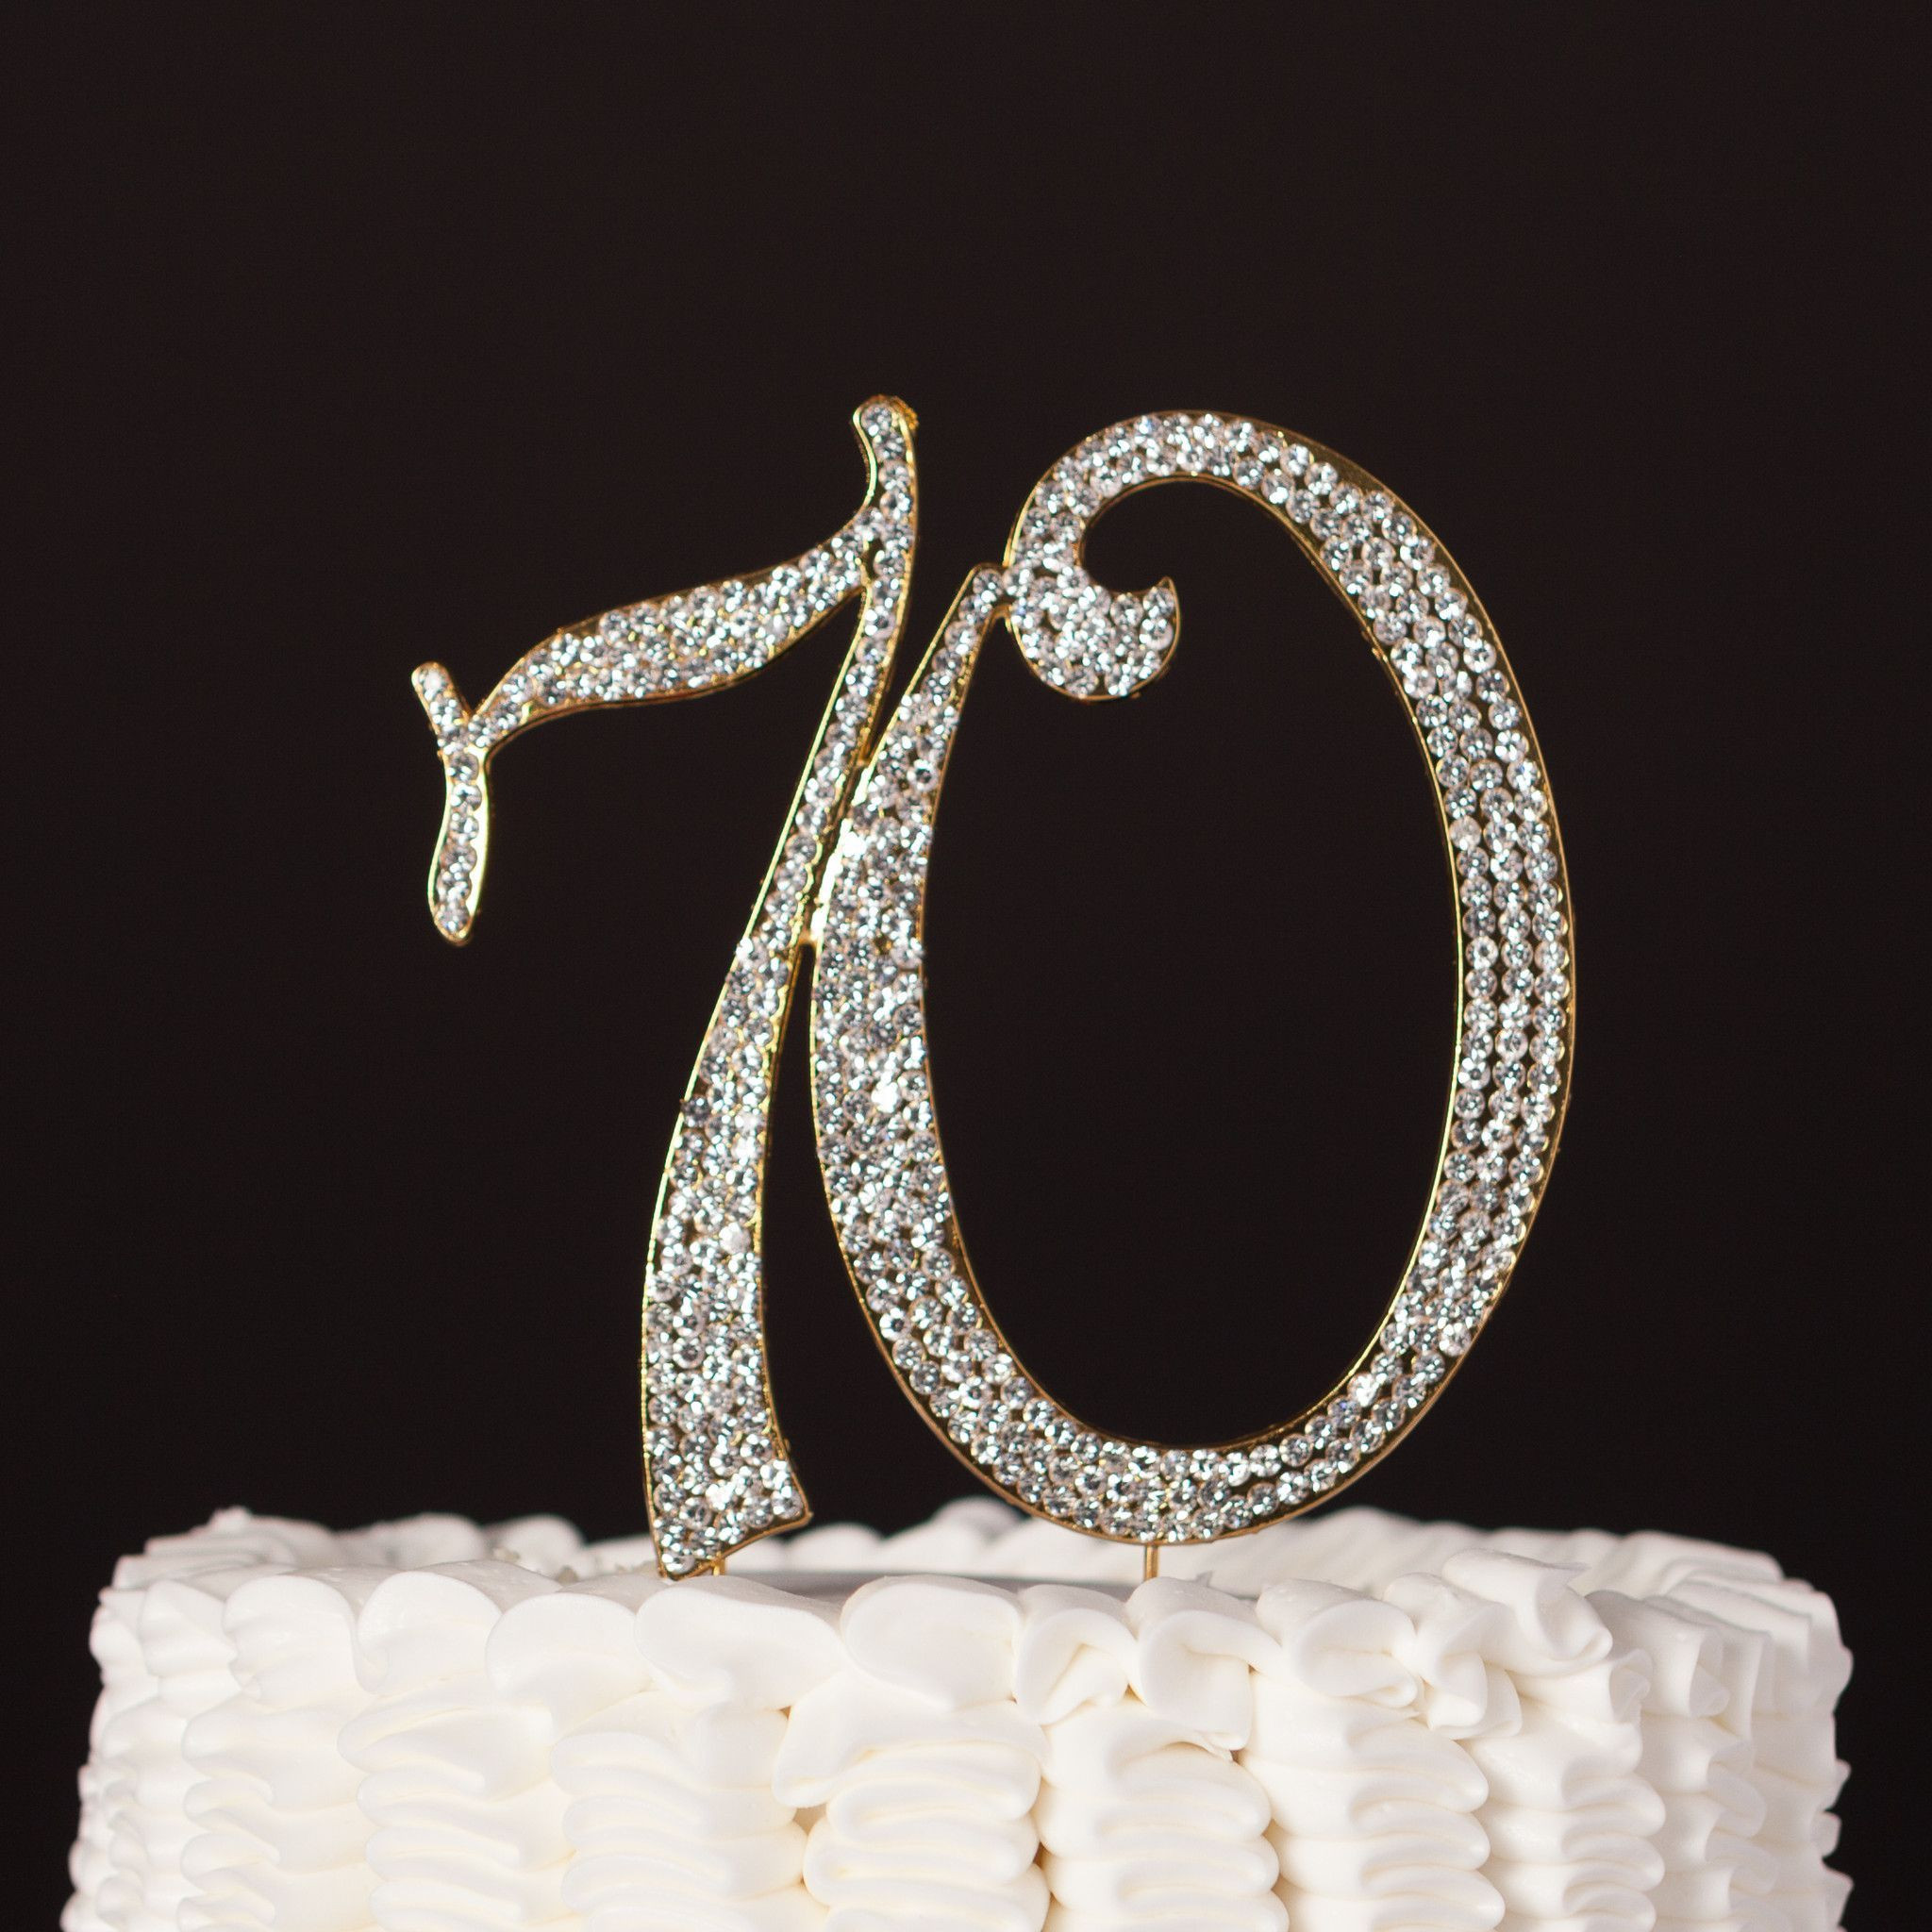 70Th Birthday Cake Toppers
 70 Cake Topper Gold